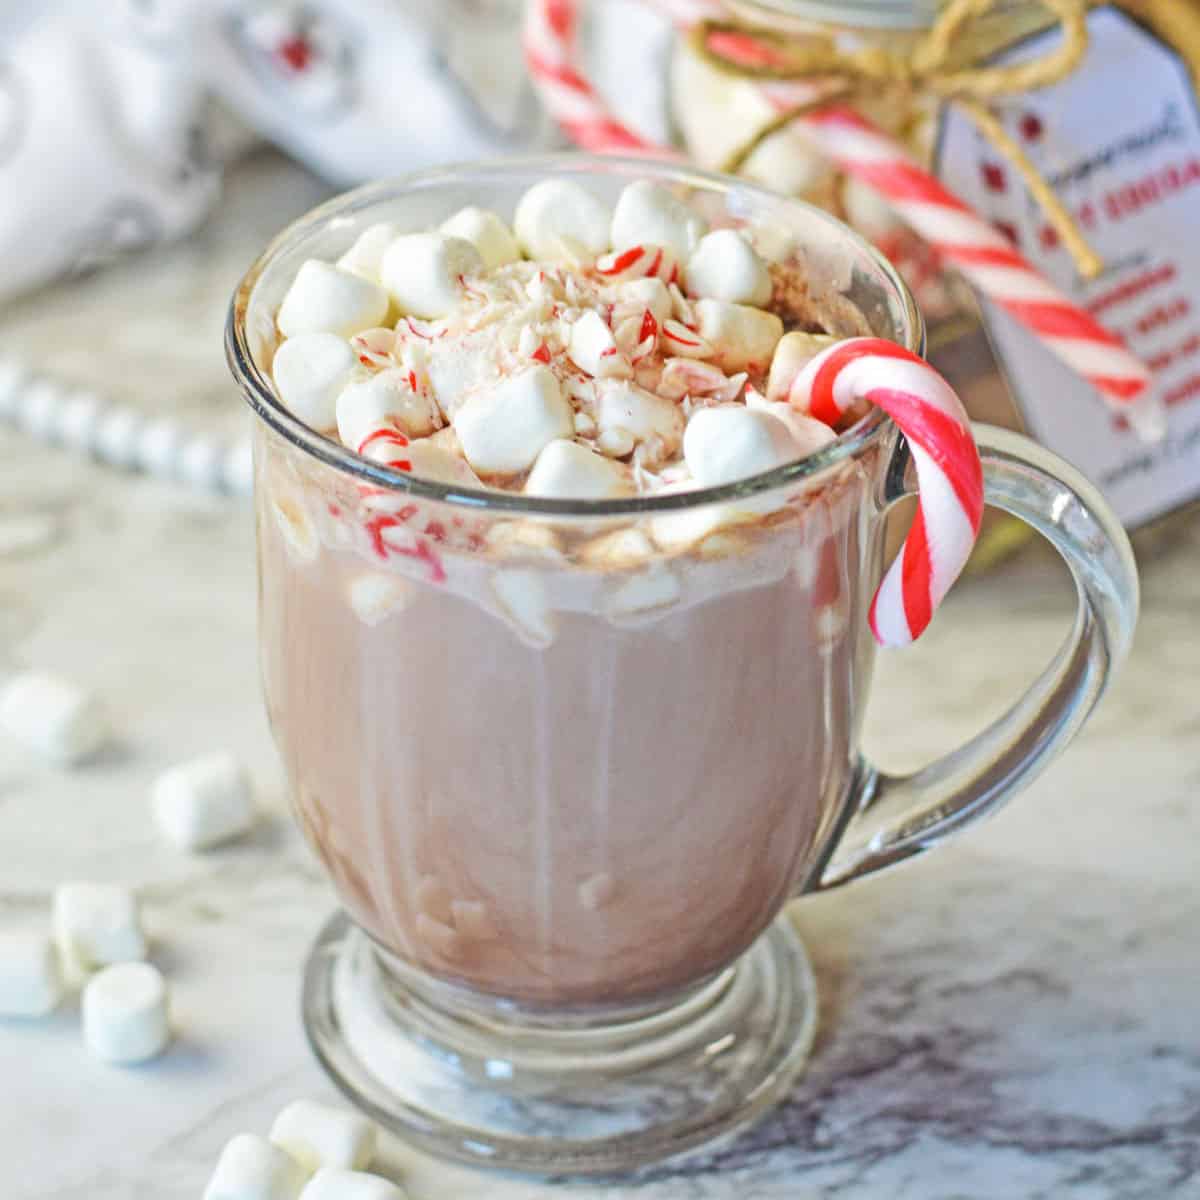 A cup of peppermint hot cocoa in a glass mug topped with crushed peppermints and mini marshmallows.